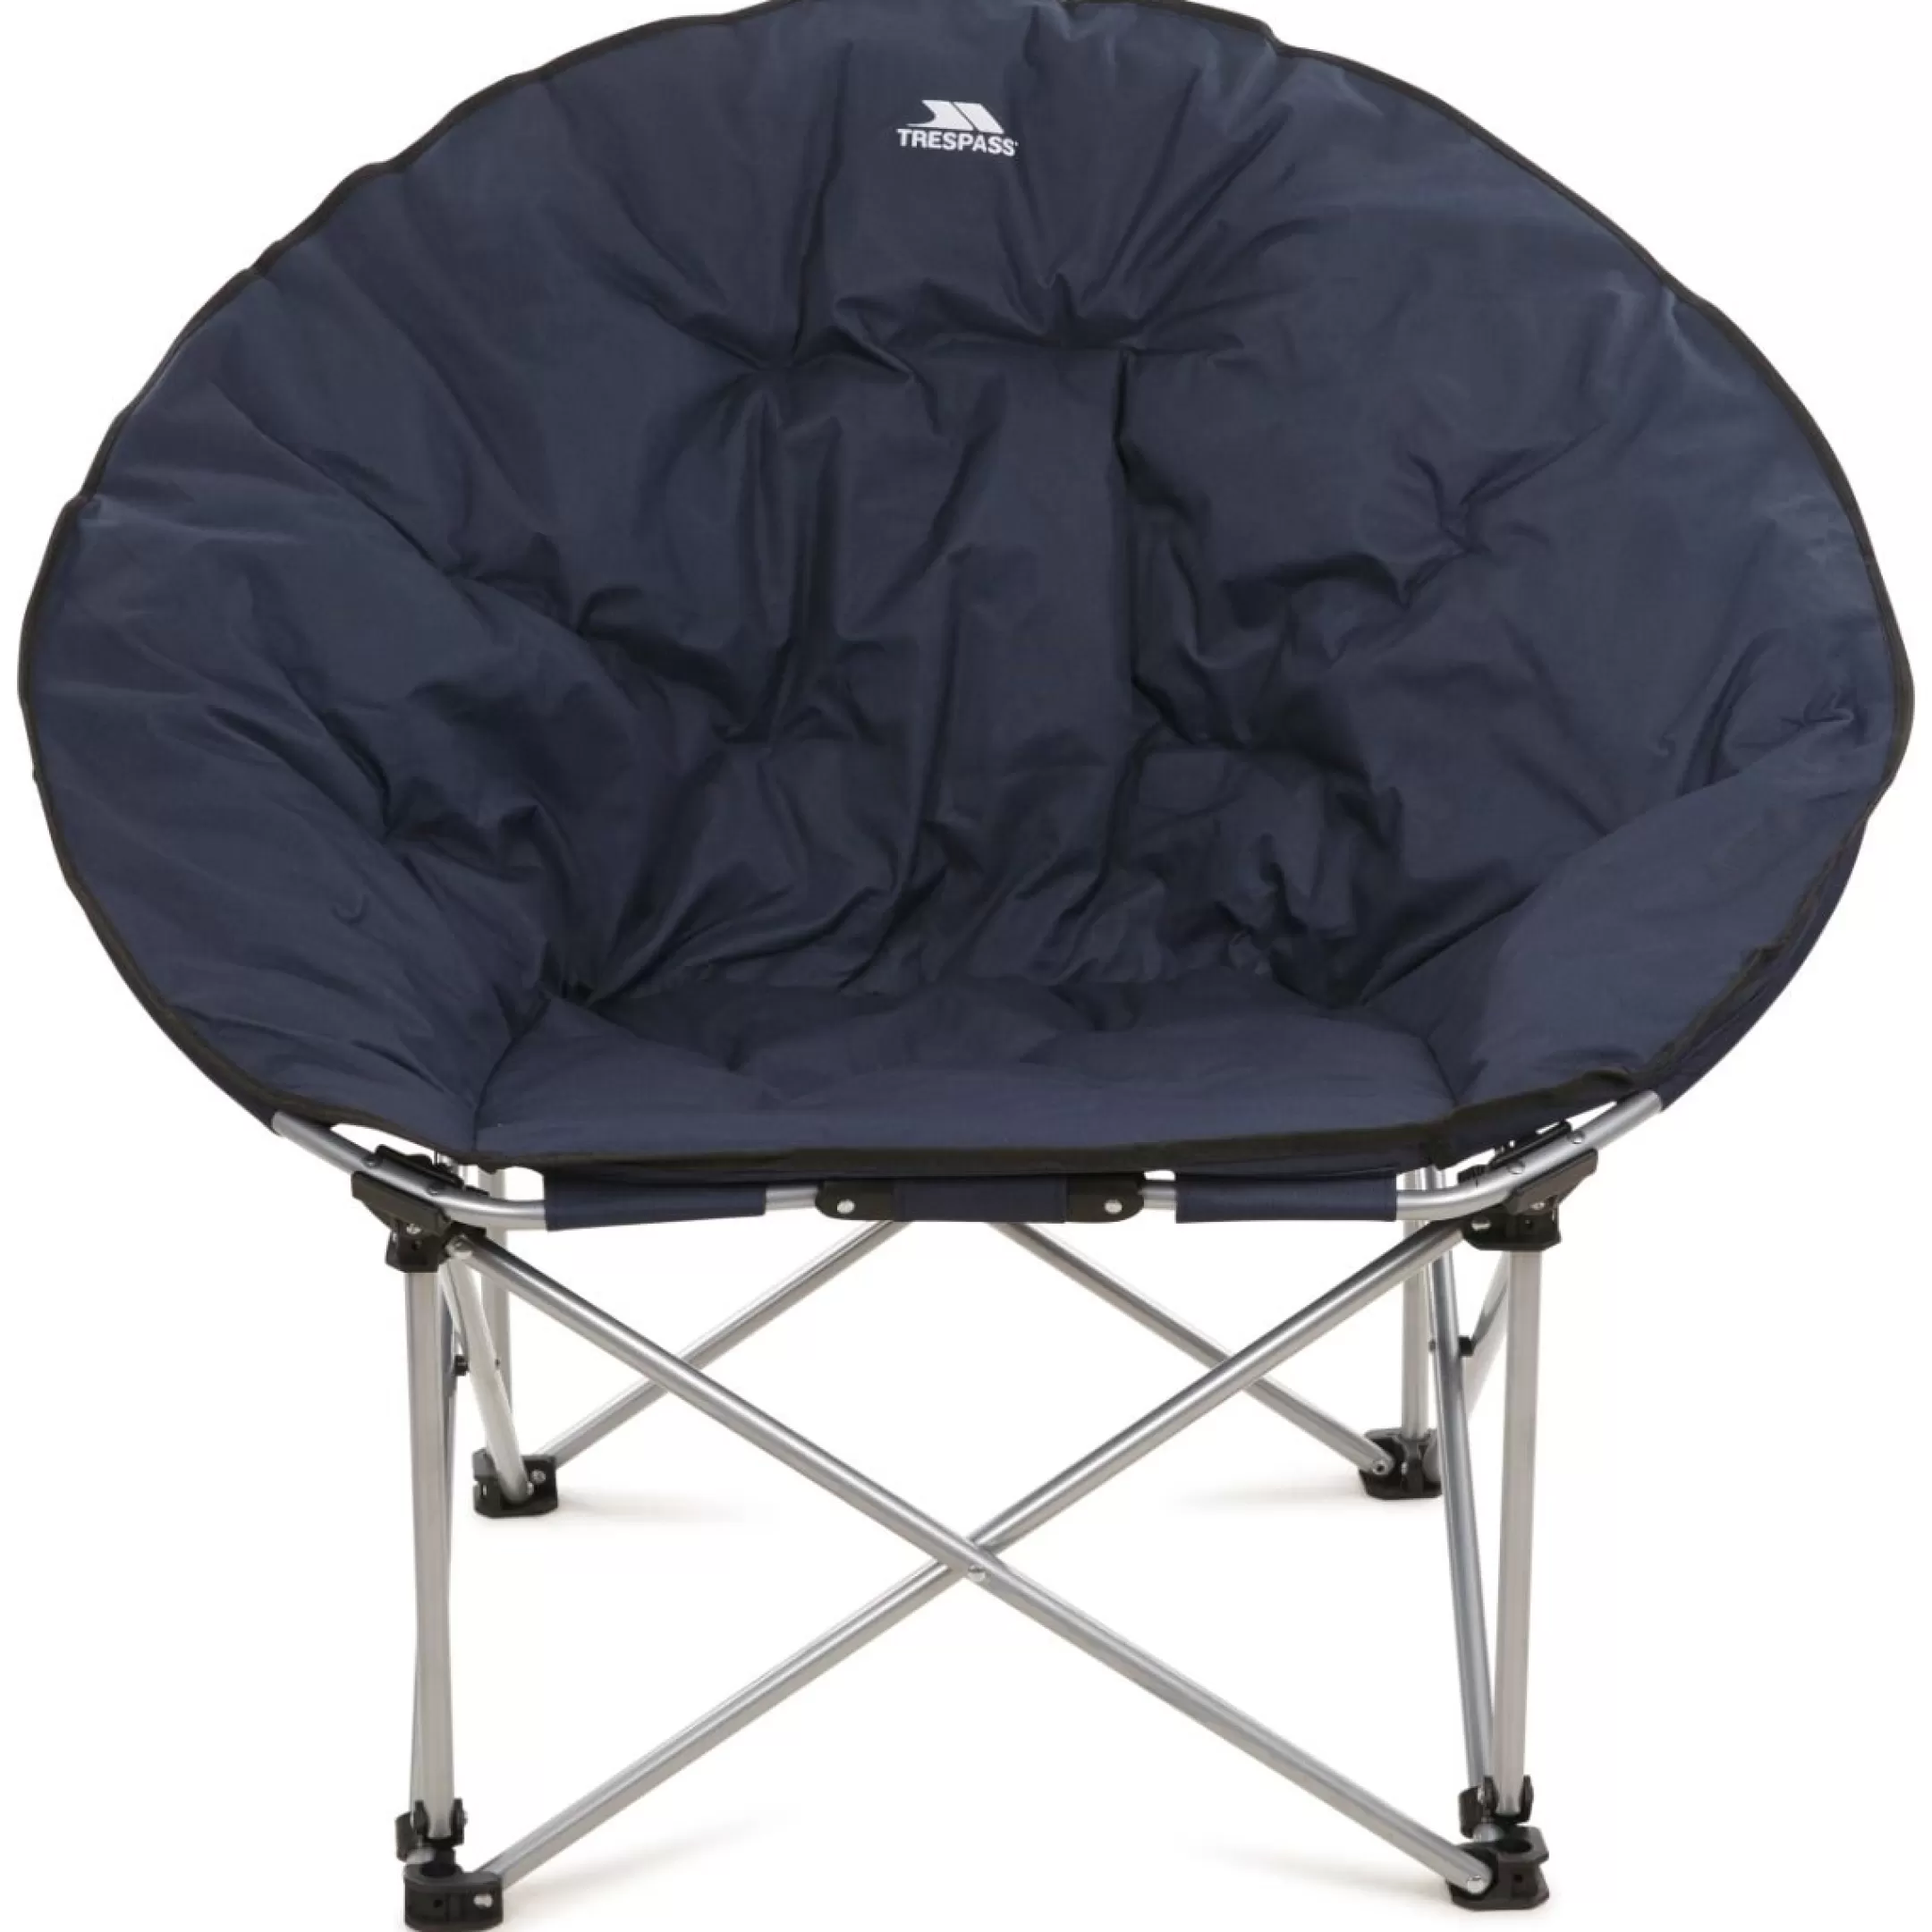 Oversized Moon Chair Camping Folding Padded Tycho | Trespass Flash Sale